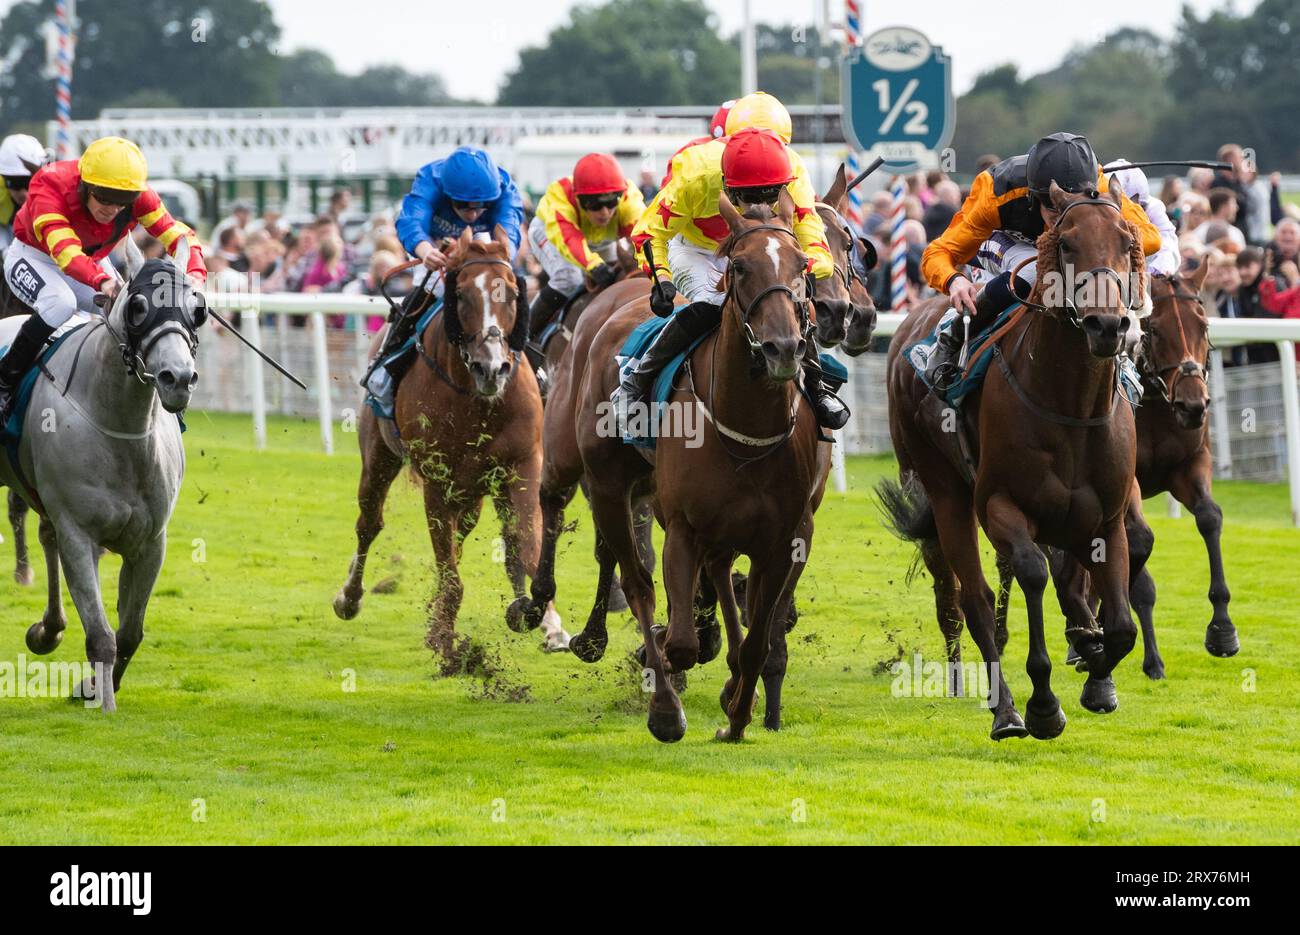 York Racecourse, York, United Kingdom, Saturday 23rd September 2023; Aphelios and jockey Daniel Muscutt win the Jigsaw Sports Branding Handicap at York Racecourse for trainer Michael Appleby and owner The Horse Watchers. Credit: JTW Equine Images/Alamy Live News Stock Photo